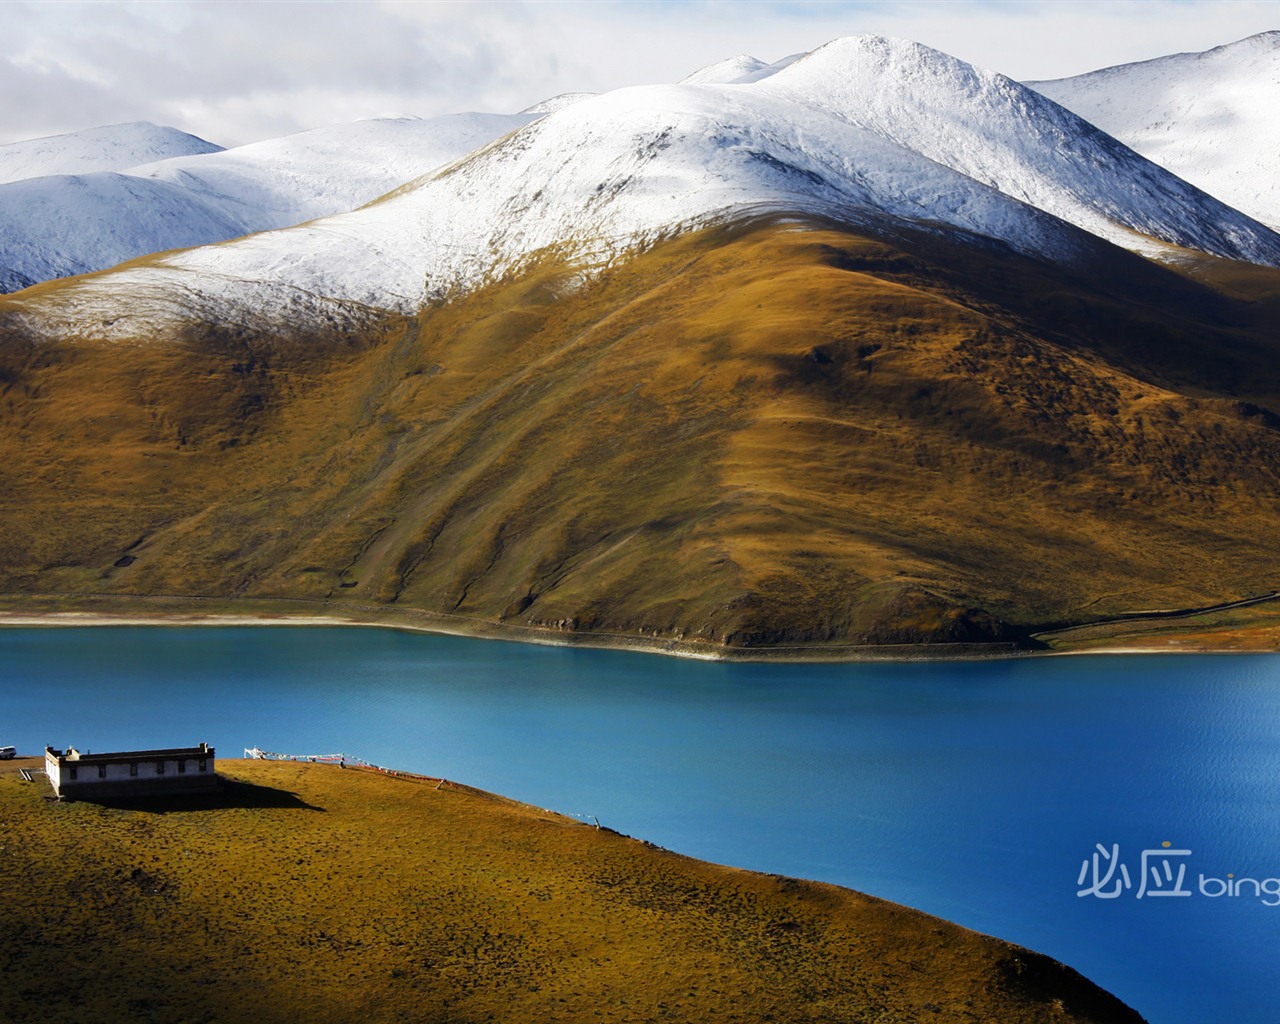 Best of Bing Wallpapers: China #14 - 1280x1024